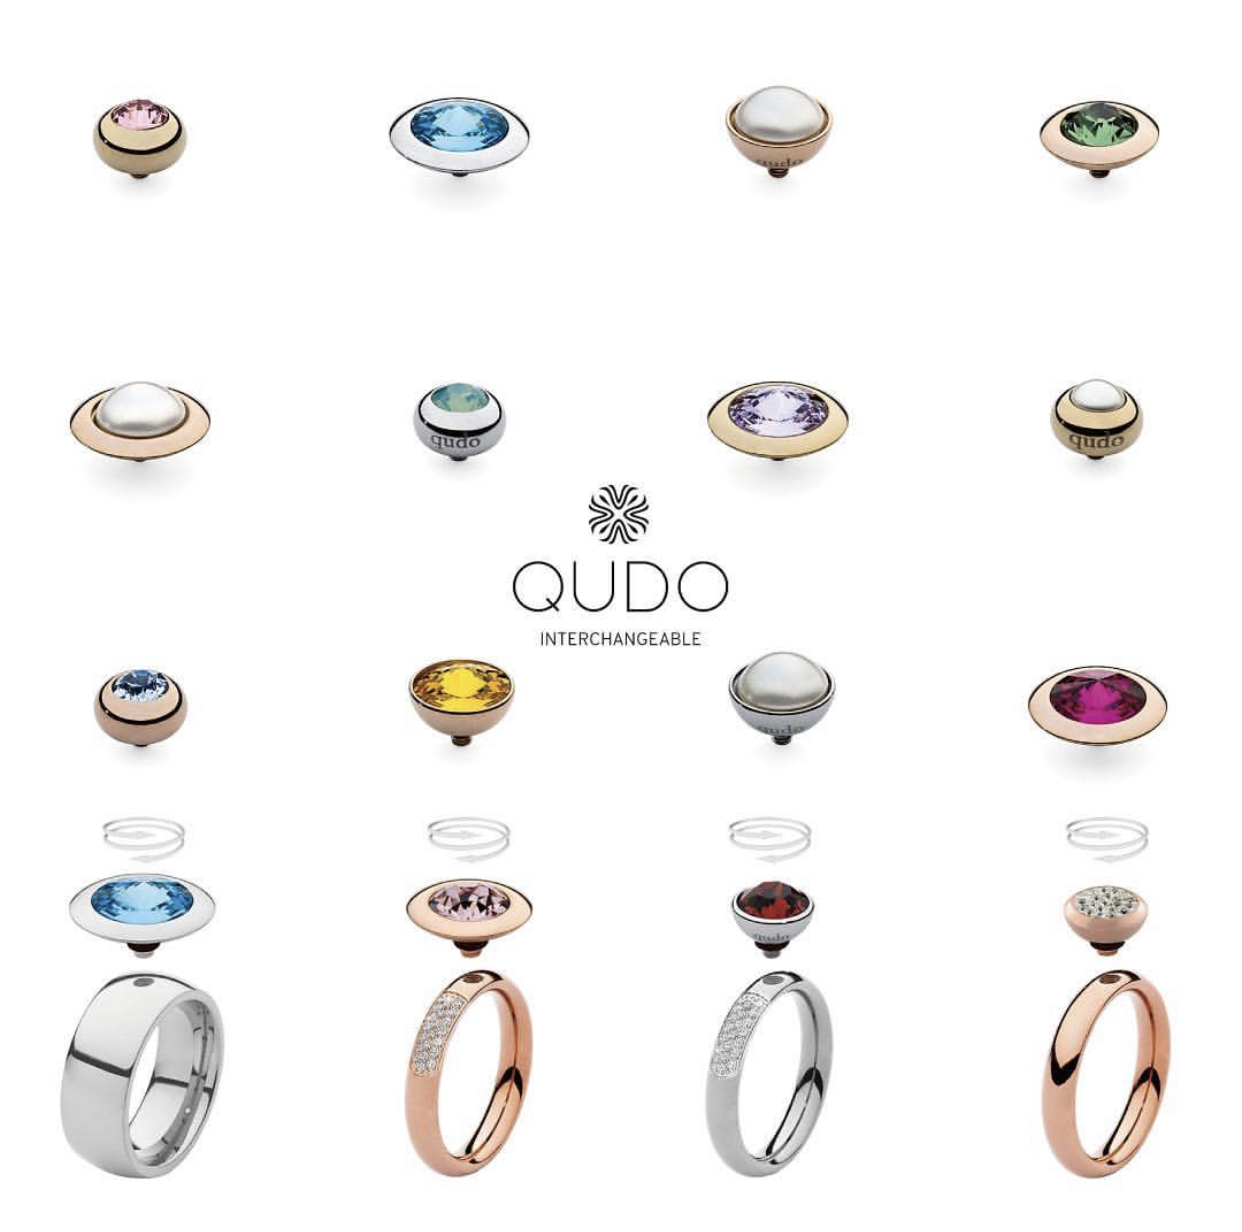 Qudo South Africa - The perfect match! Qudo Watch and QUDO Jewellery  #qudo_sa #qudo #qudojewellery #qudowatches #qudocollection #ilovequdo  #fashion #trendsetter #love #musthave #style | Facebook